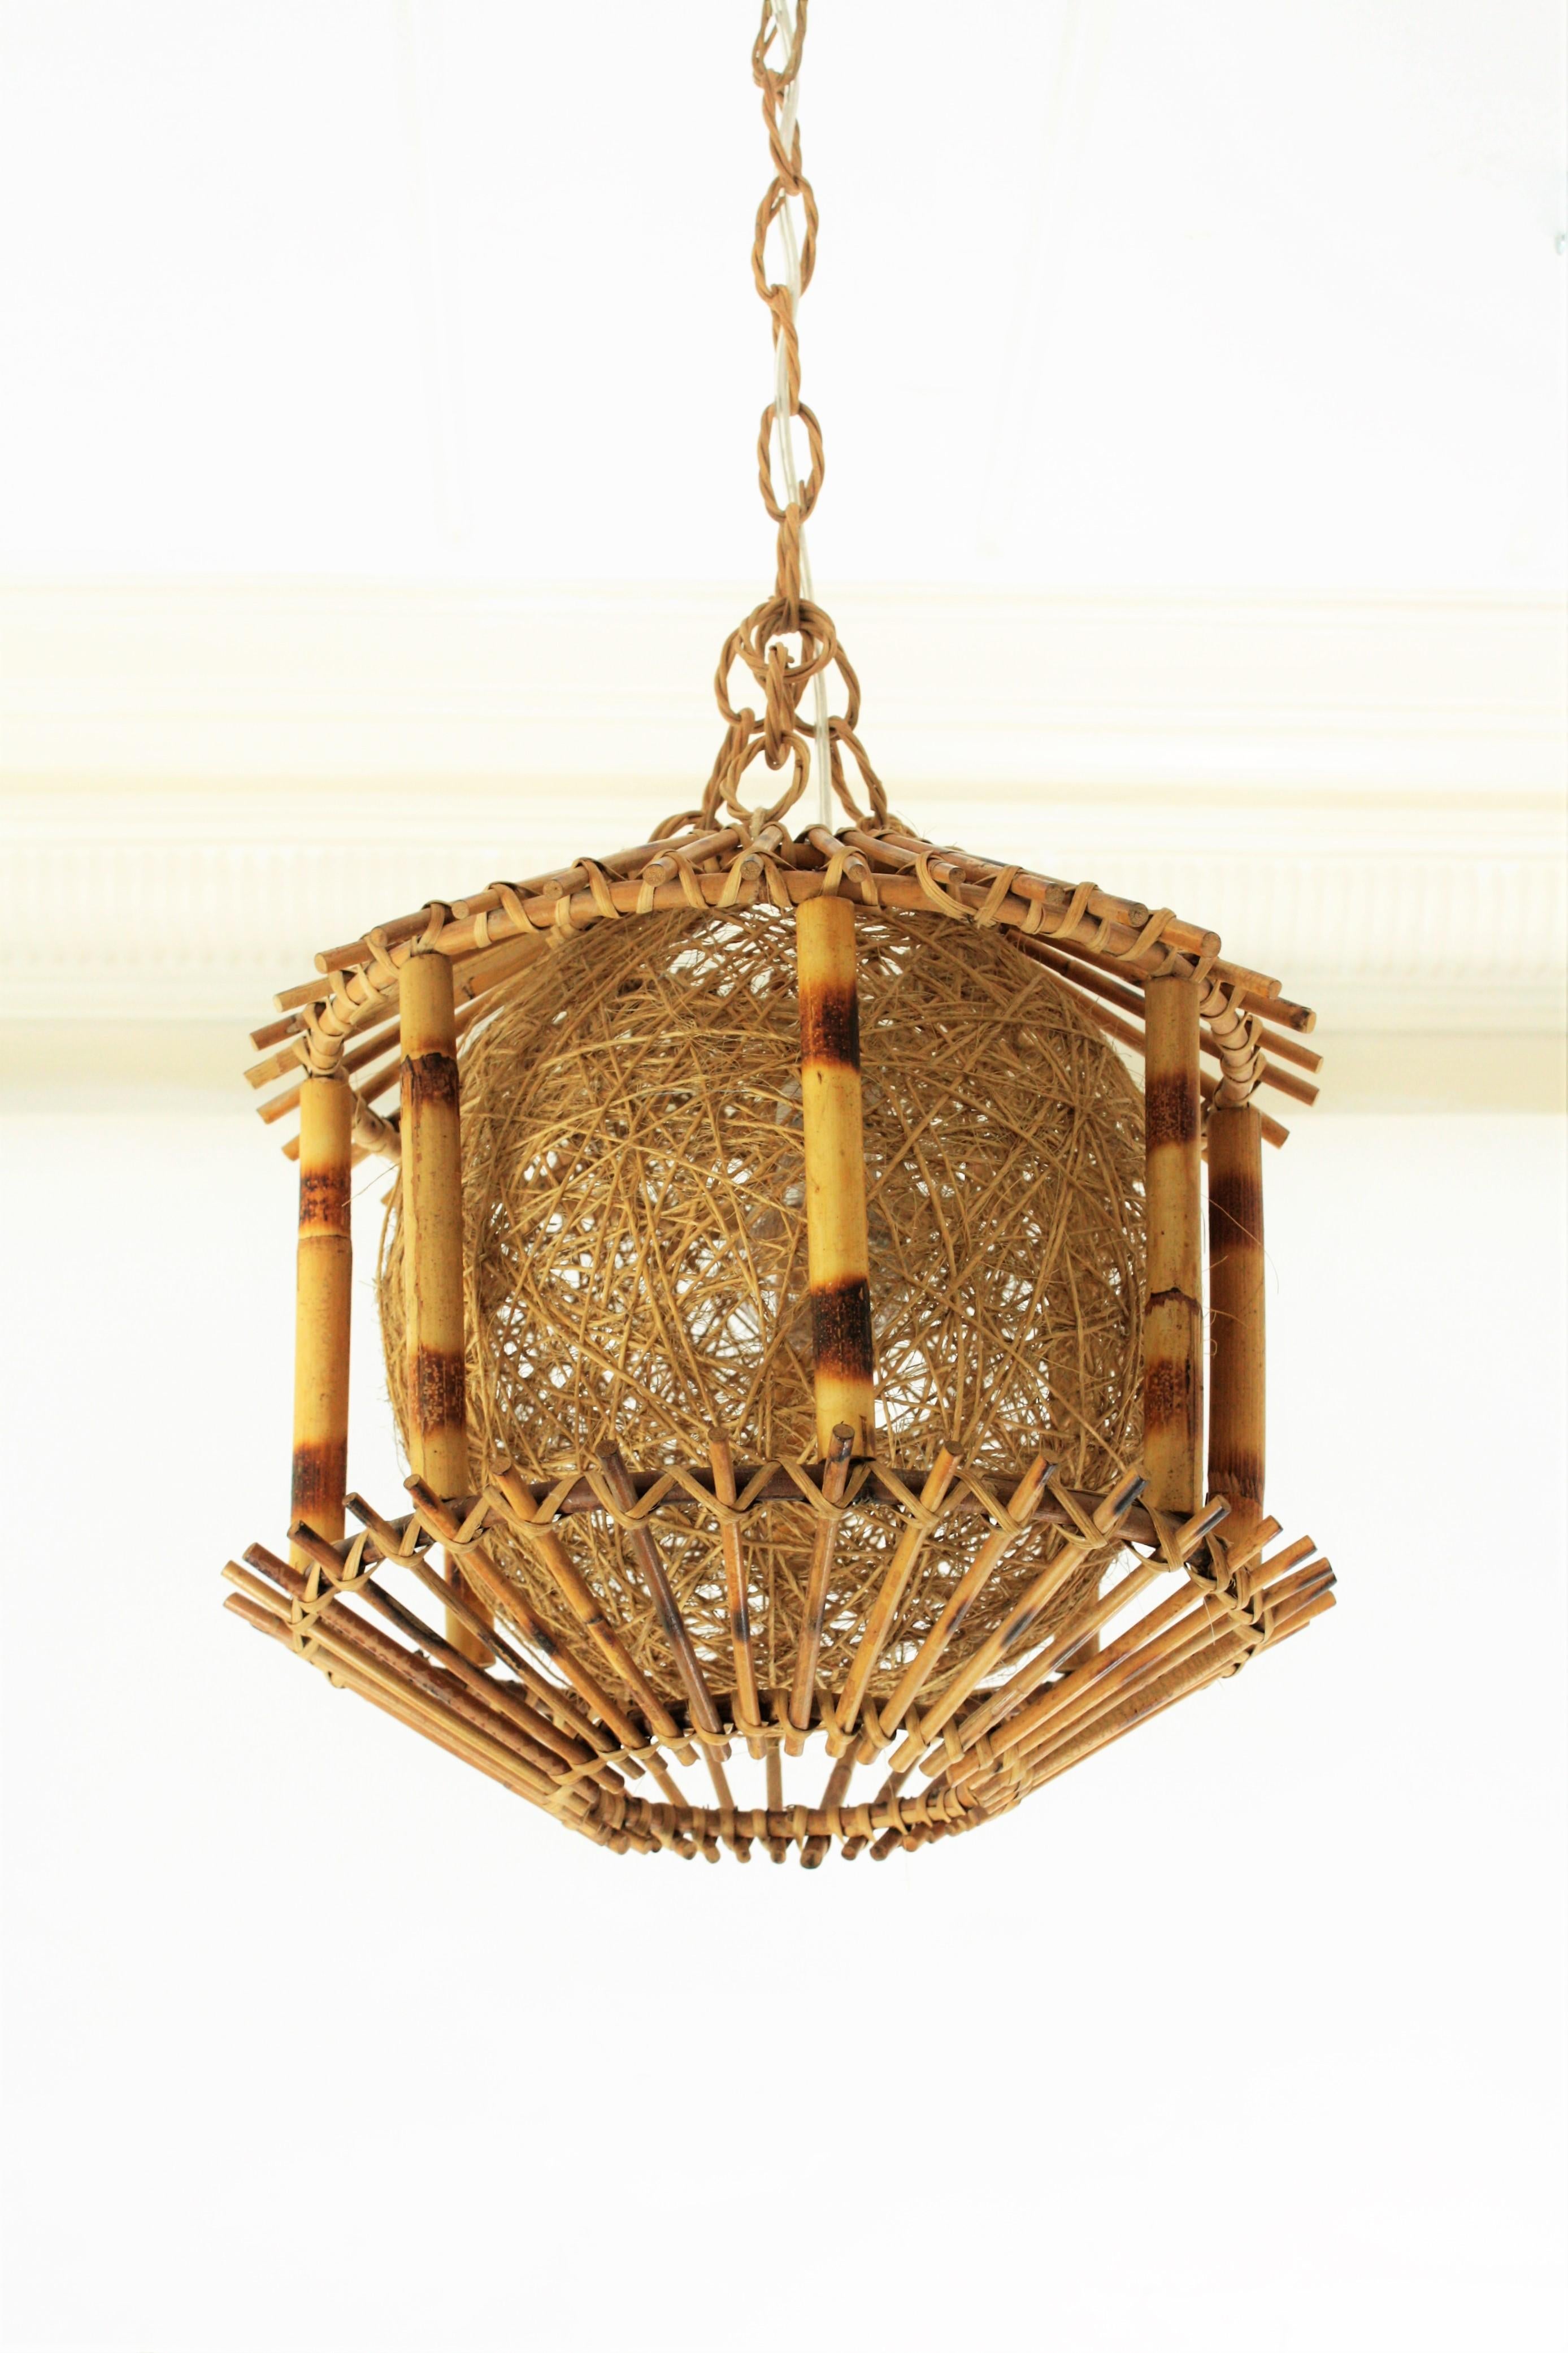 Rattan and Bamboo Pendant Hanging Lamp / Lantern with Chinoiserie Accents 4